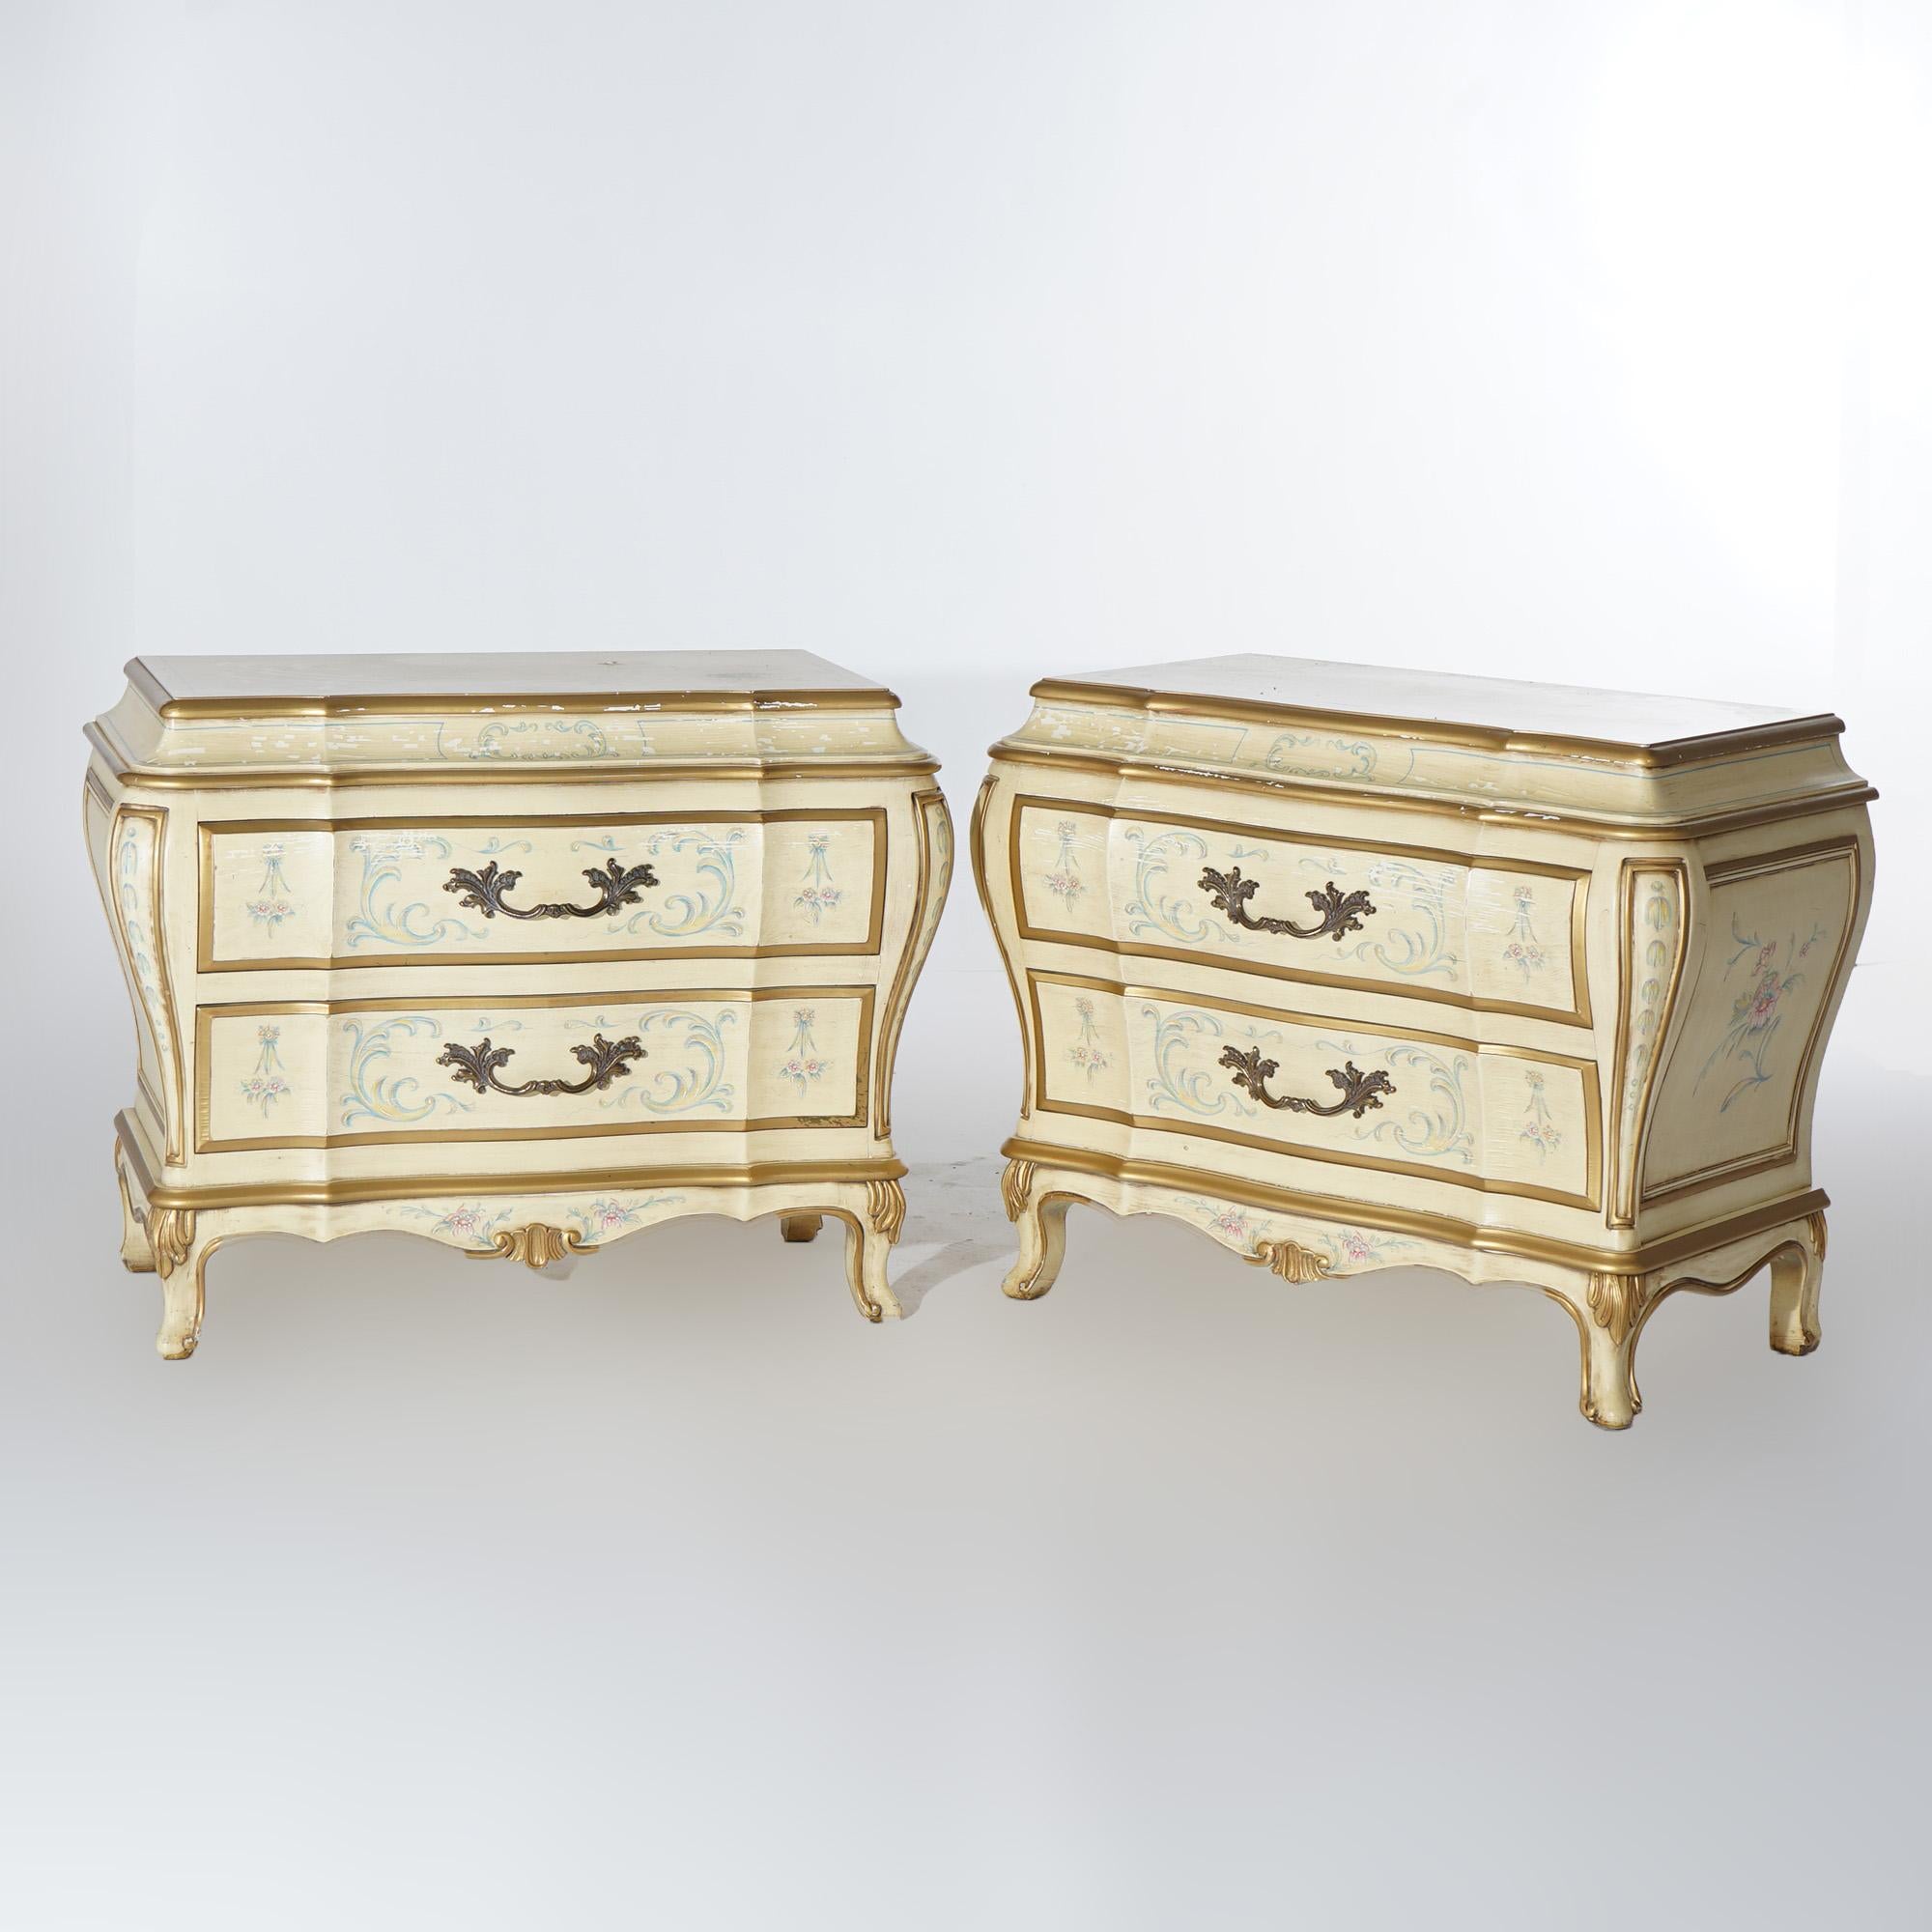 A vintage pair of French provincial style commodes by Karges offer bombe form with painted flowers, foliate cast pulls and gilt highlights, maker label as photographed, 20th century

Measures: 26